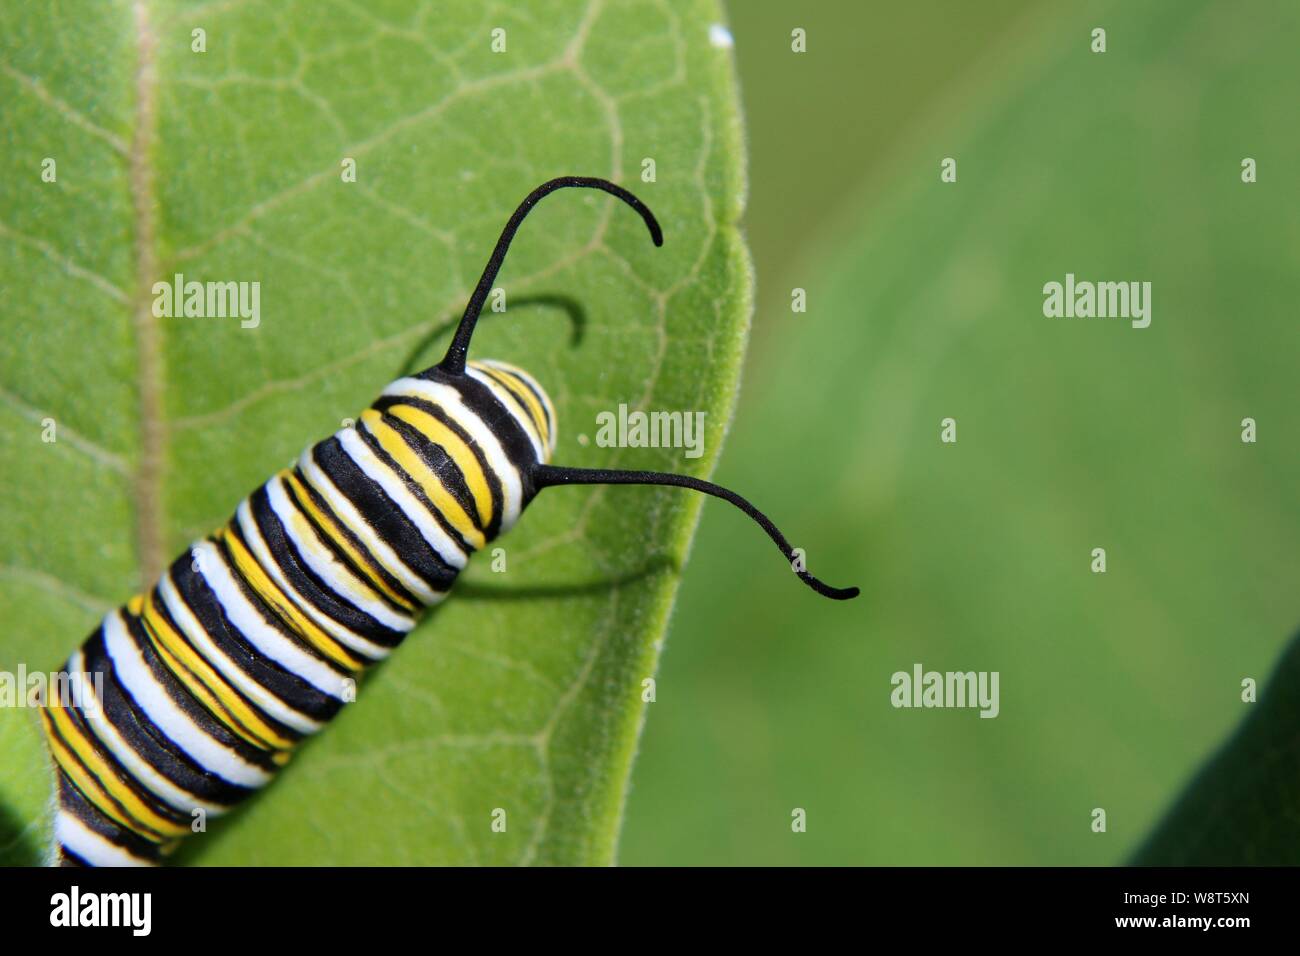 Close Up Of A Monarch Caterpillar Head With Antennae Stock Photo